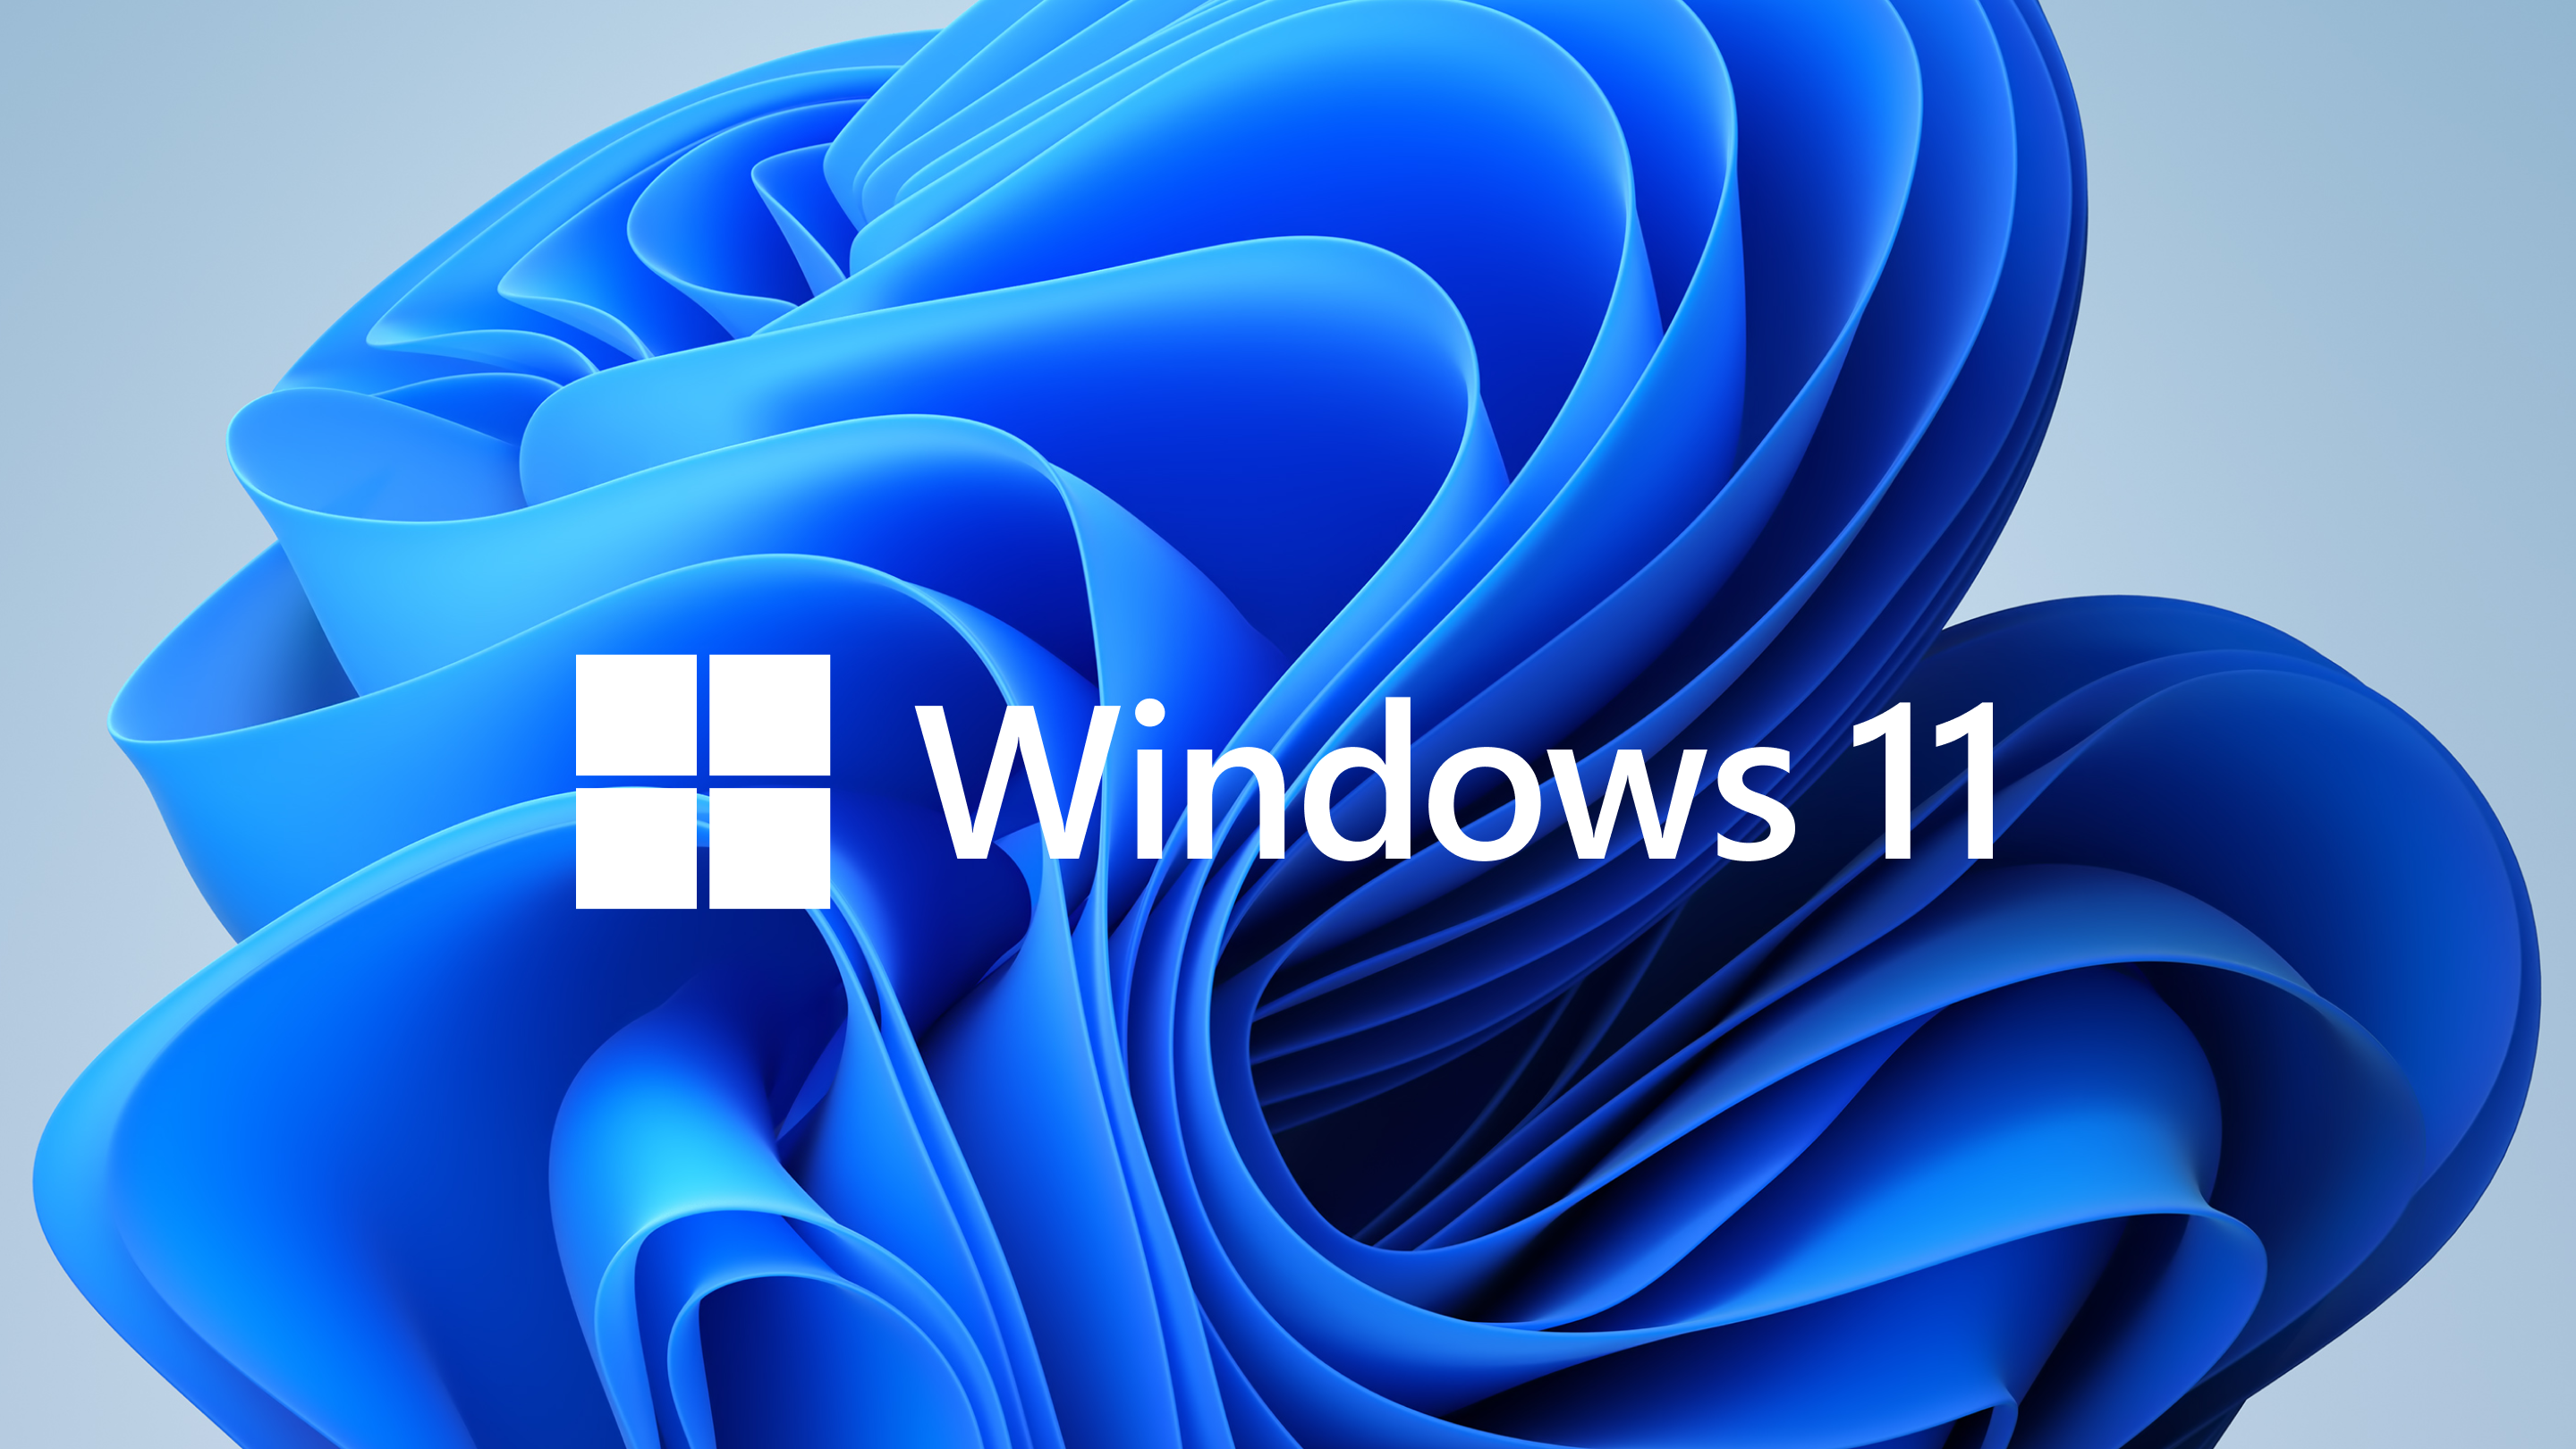 Microsoft warns that new test builds of Windows 11 could bring problems